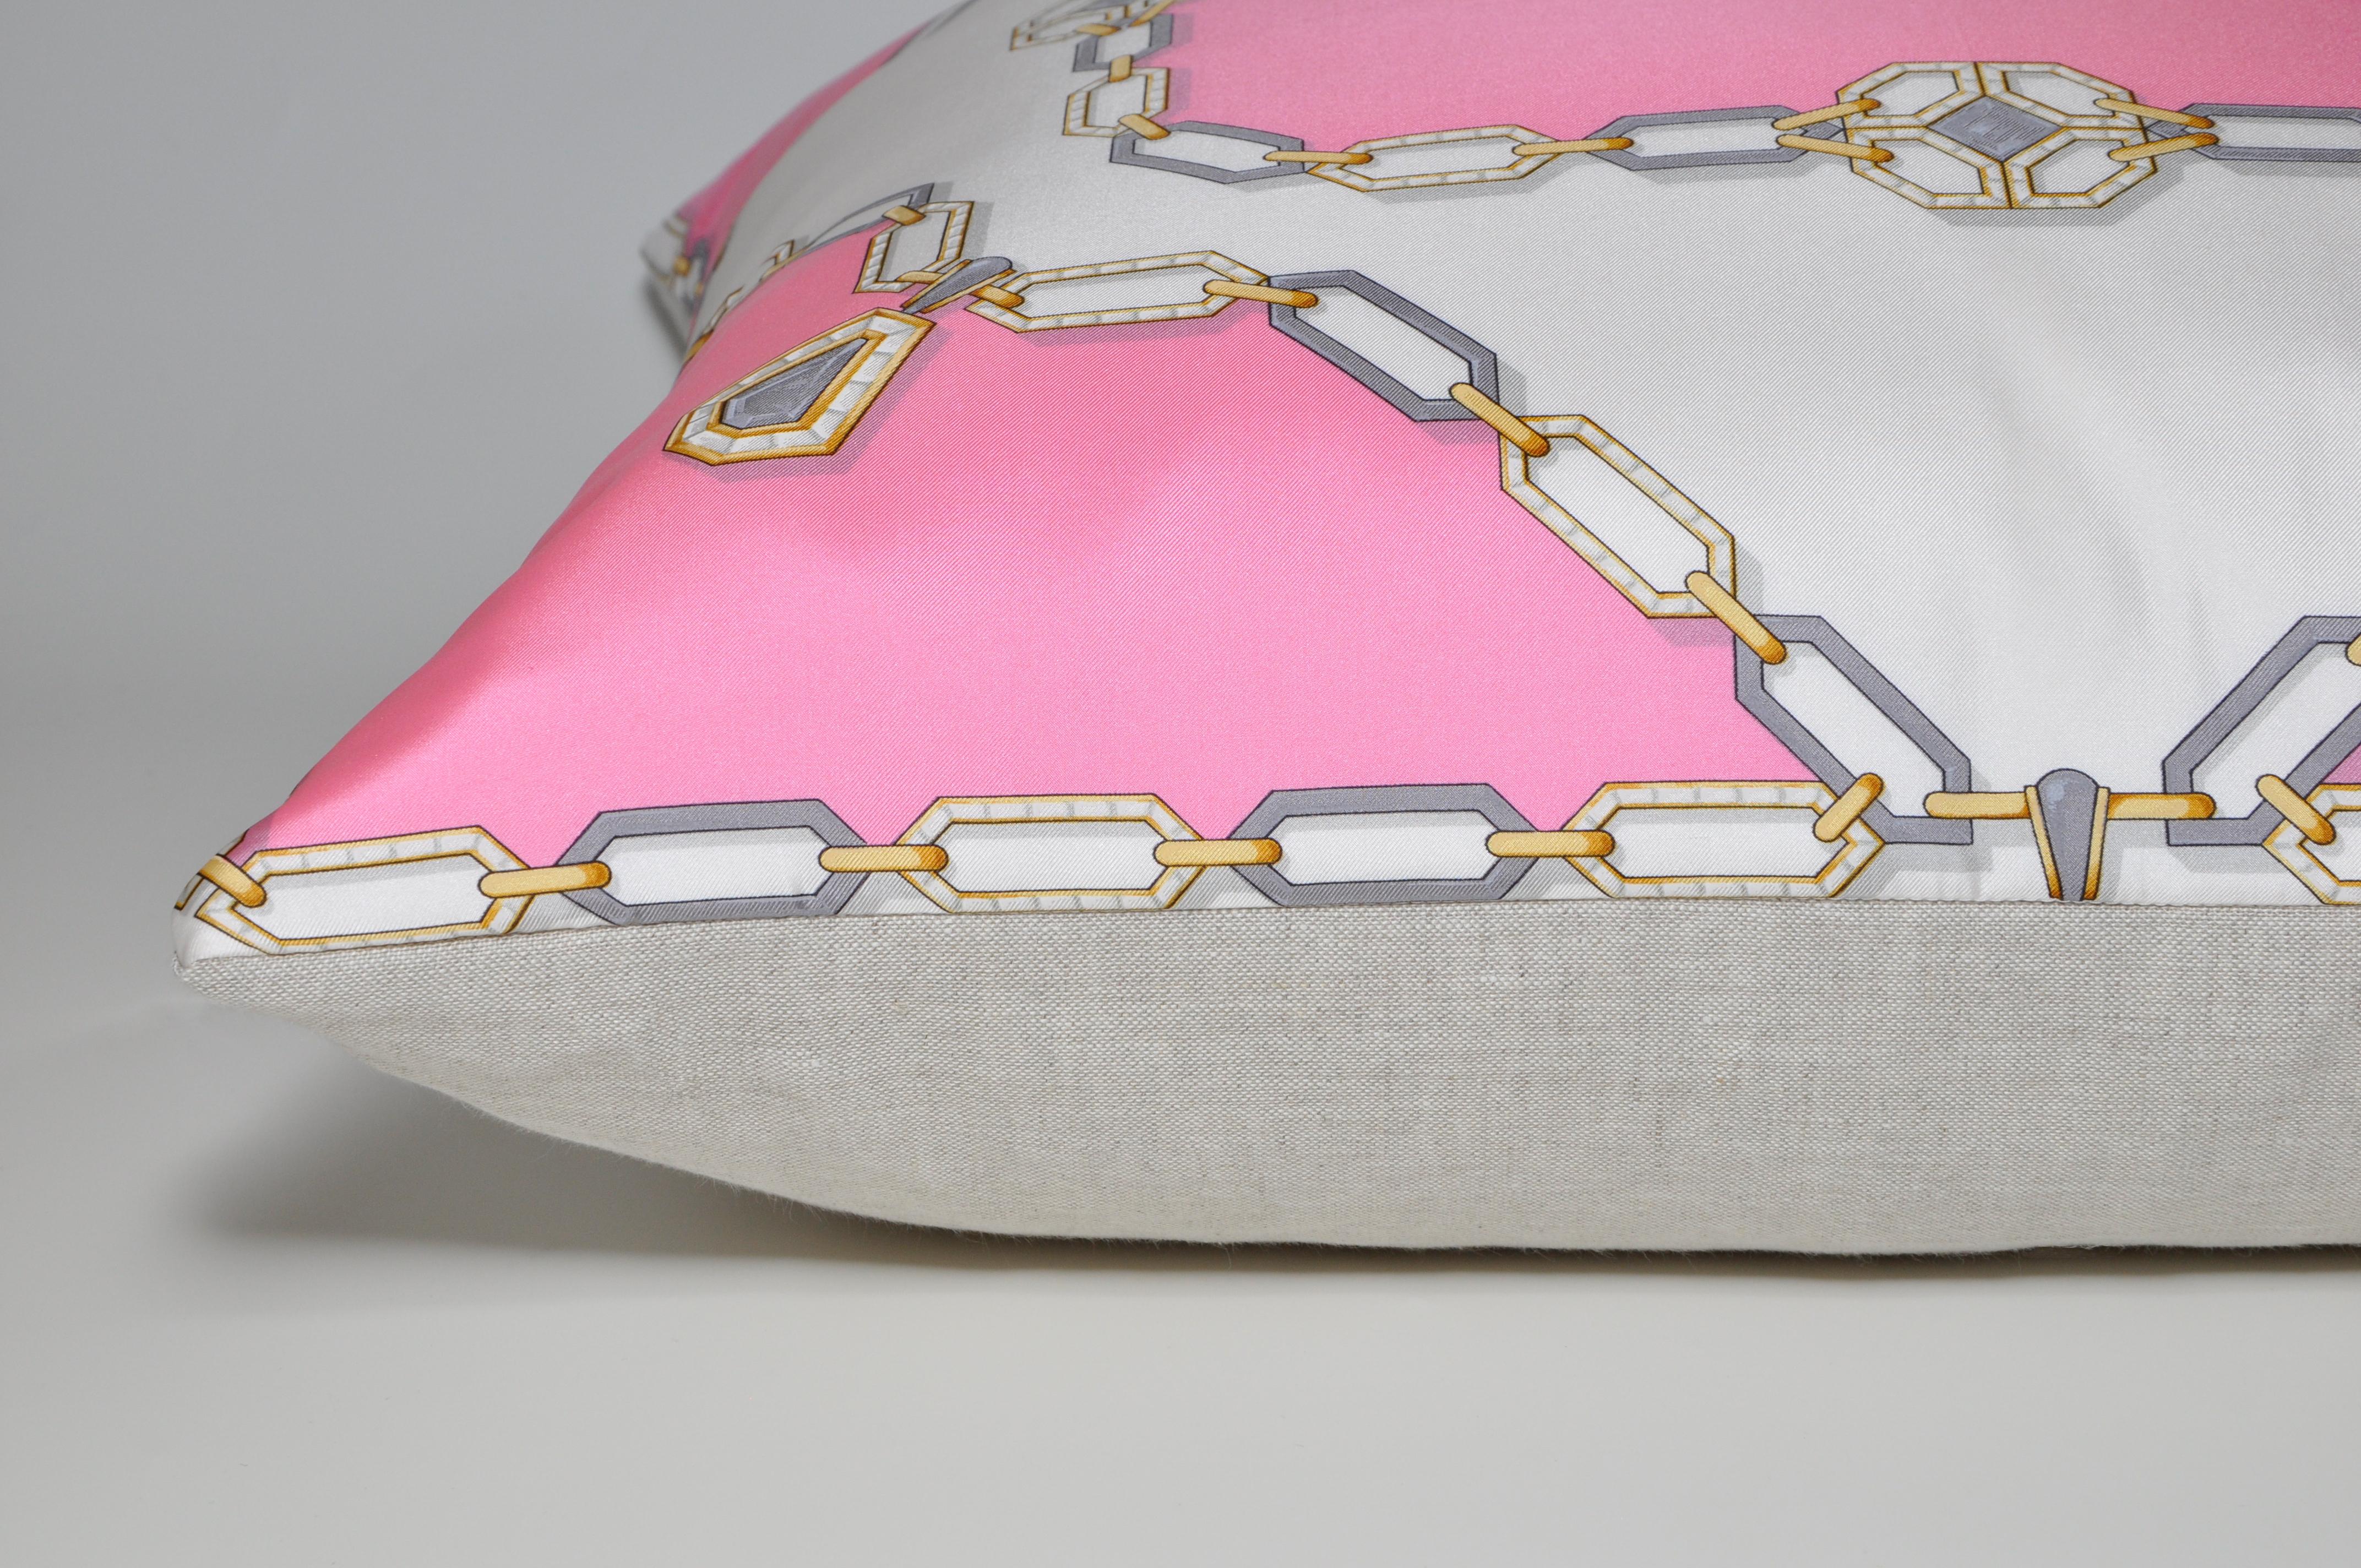 French Vintage Cartier Jewelry Pink Silk Scarf with Irish Linen Cushion Pillow